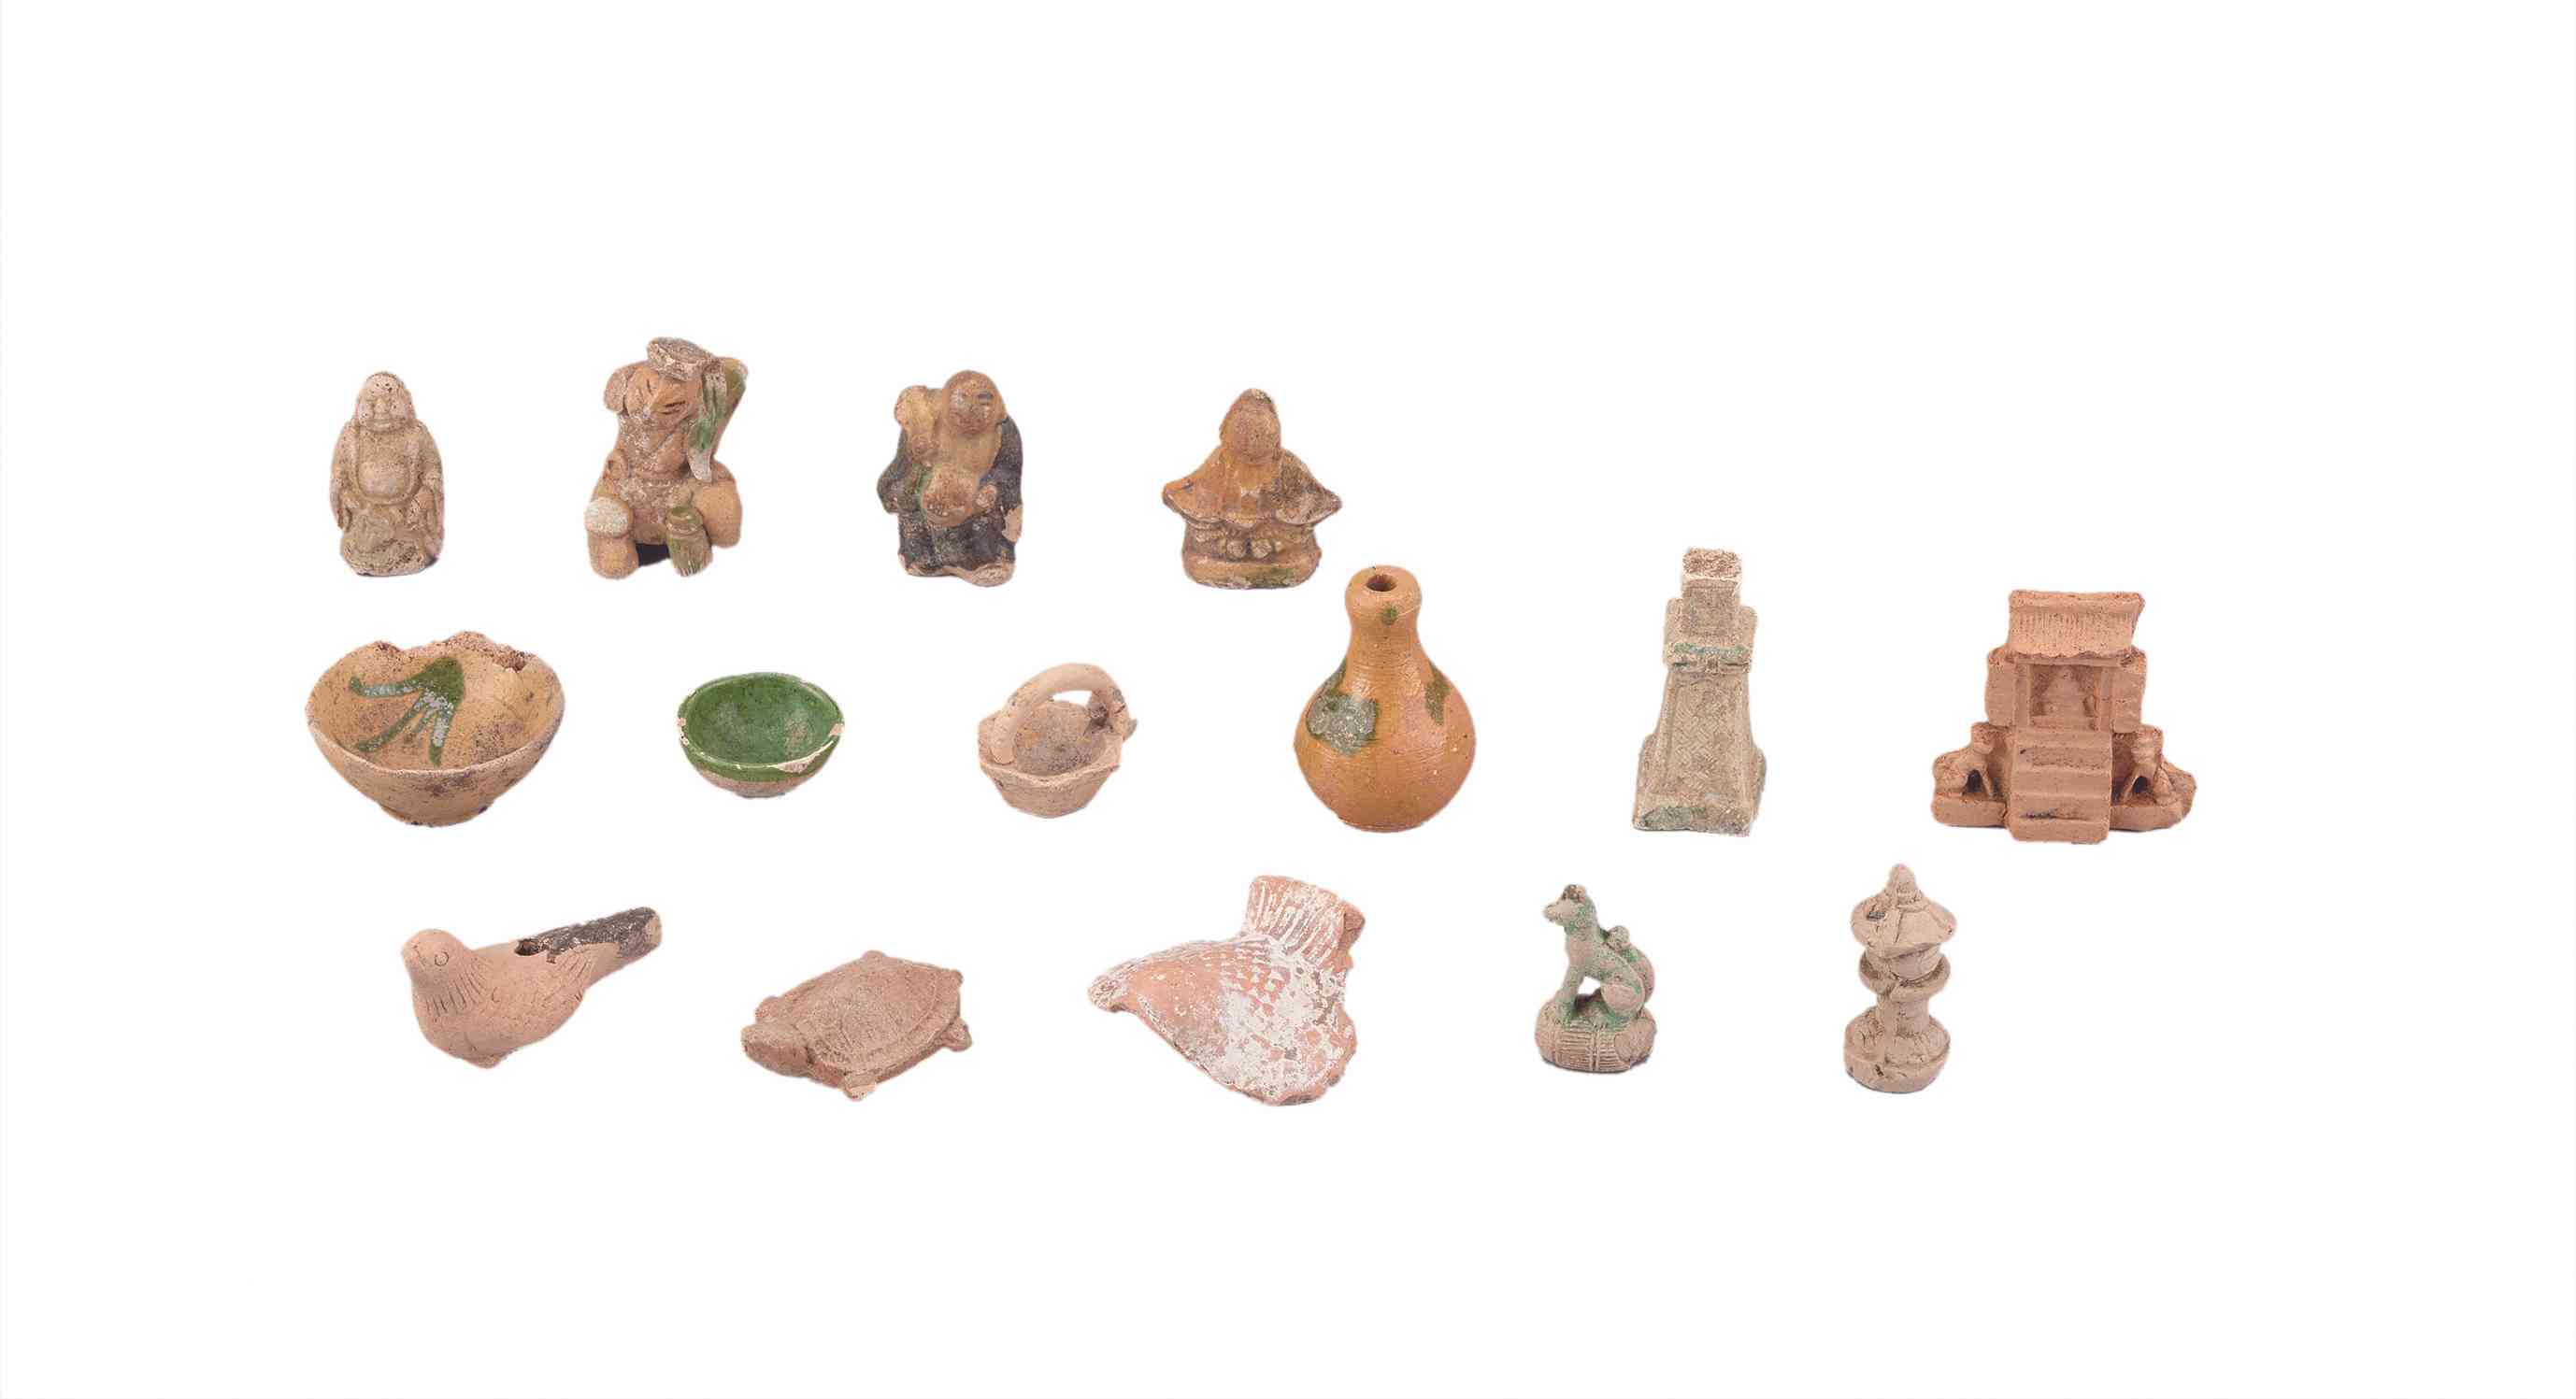 Material excavated from the site of Donge-in (clay figure) Edo Period, owned by The Museum of Kyoto